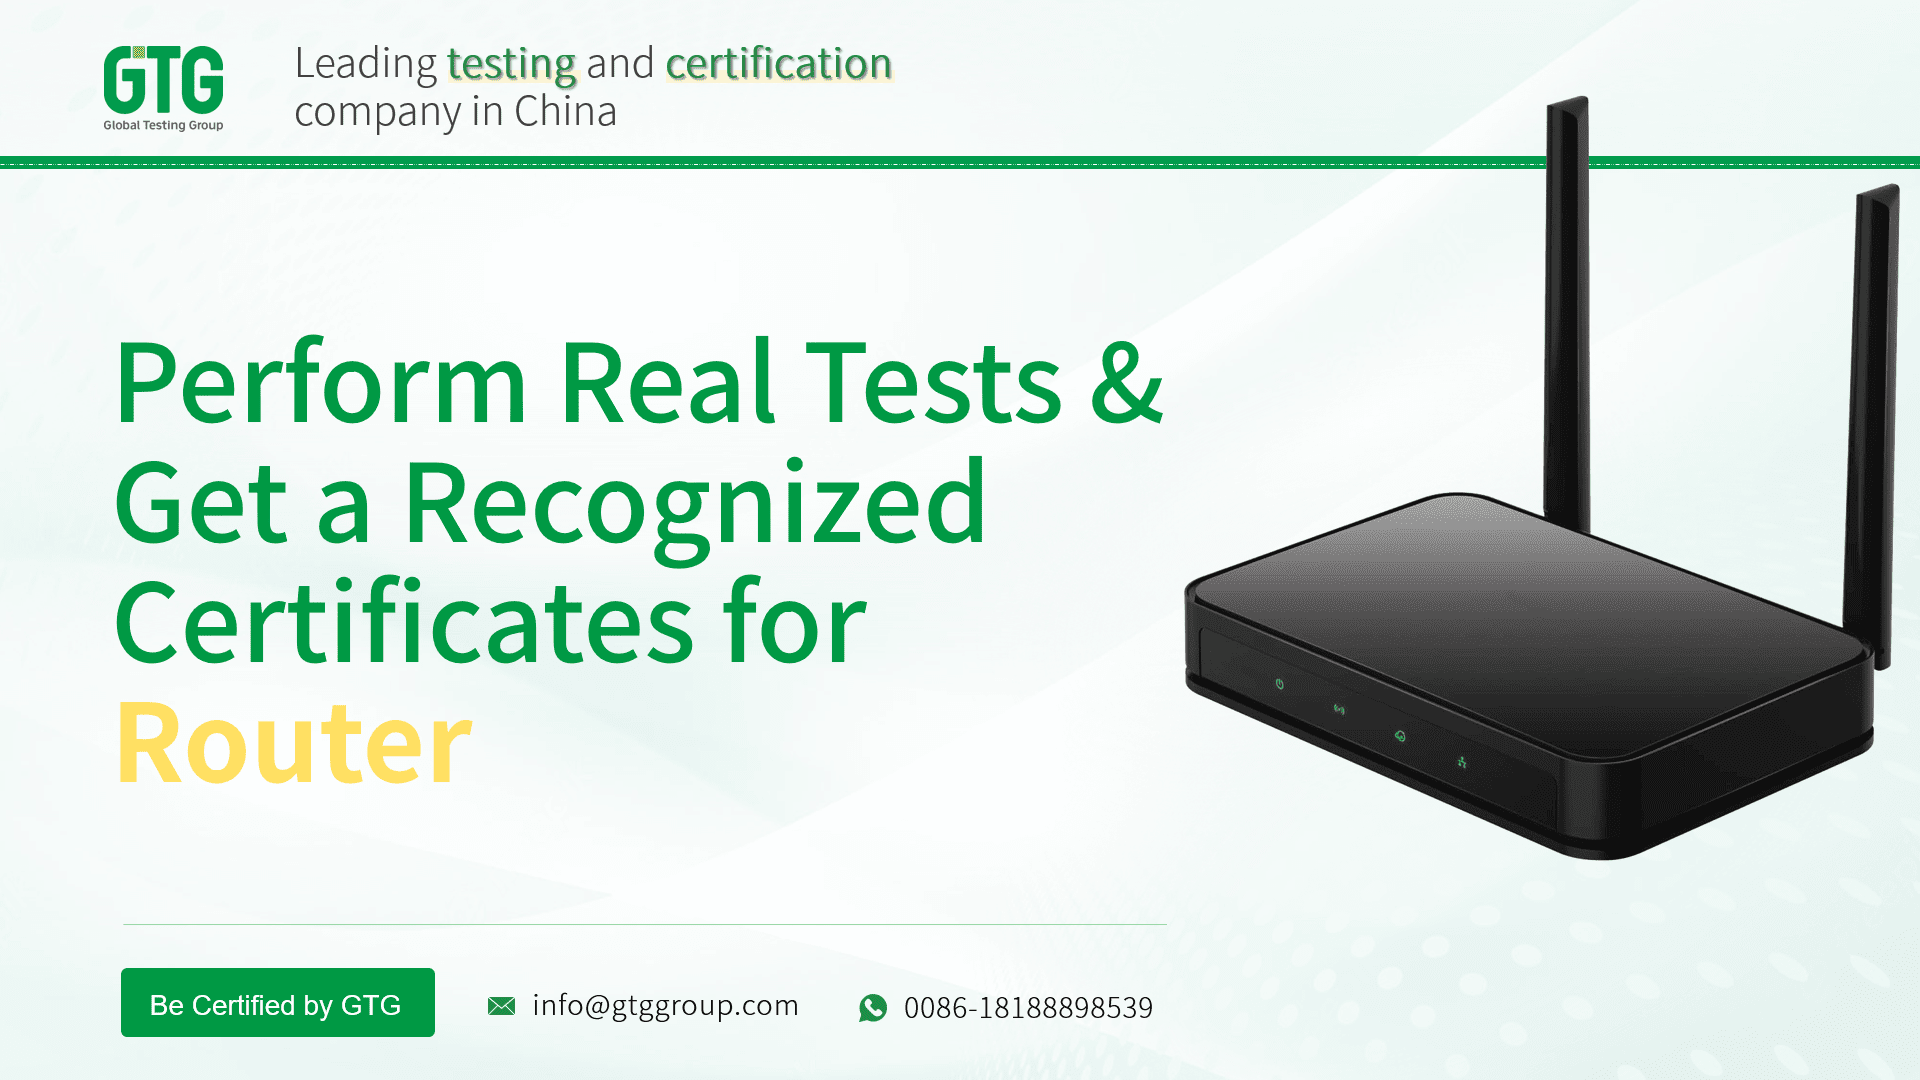 Get Test Report and Certifications for Router from GTG Group